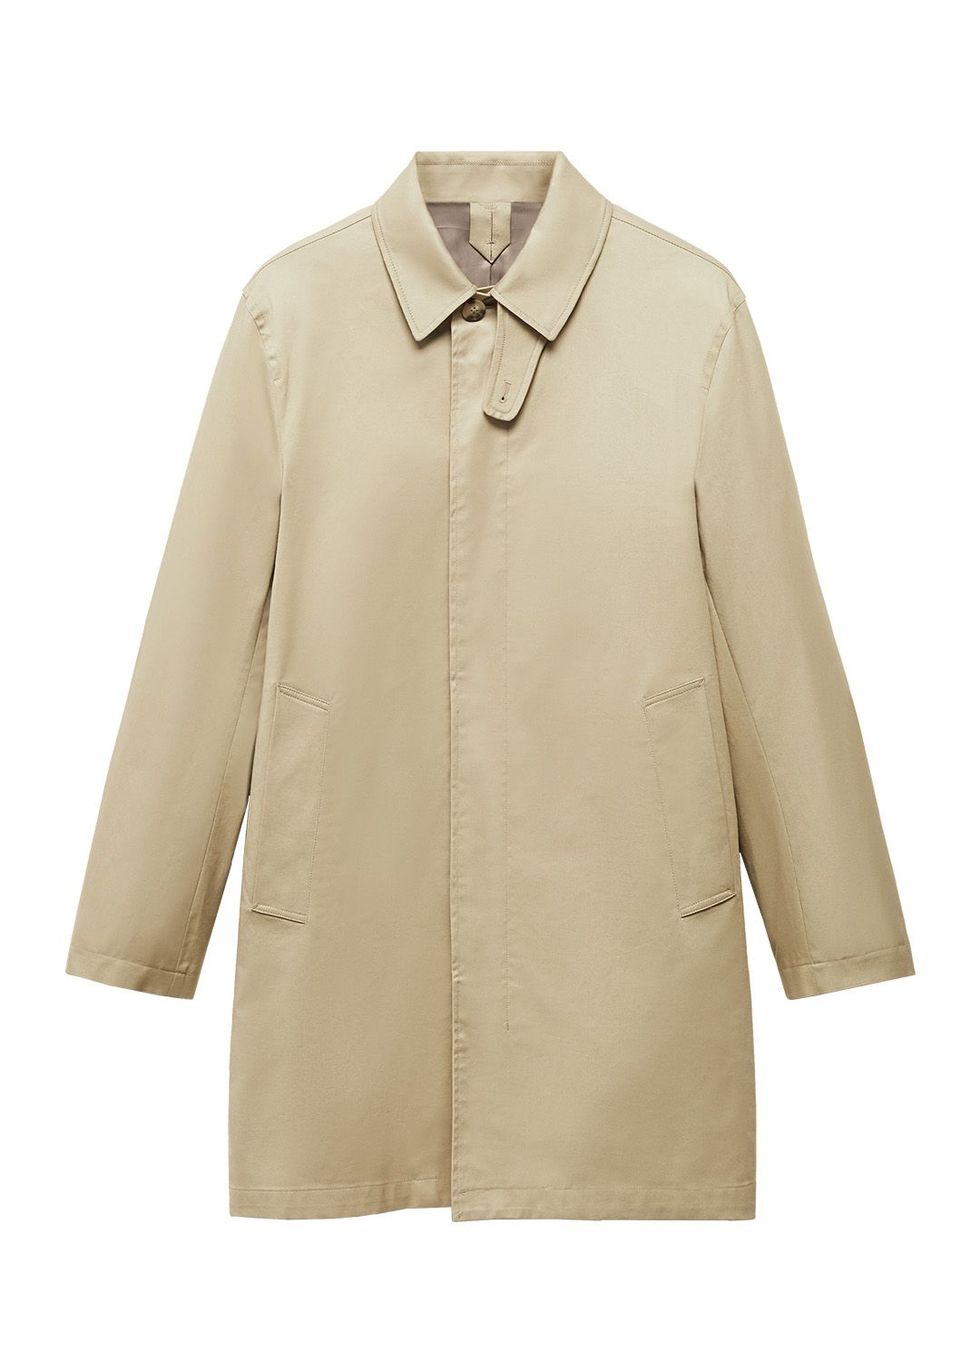 Cotton trench